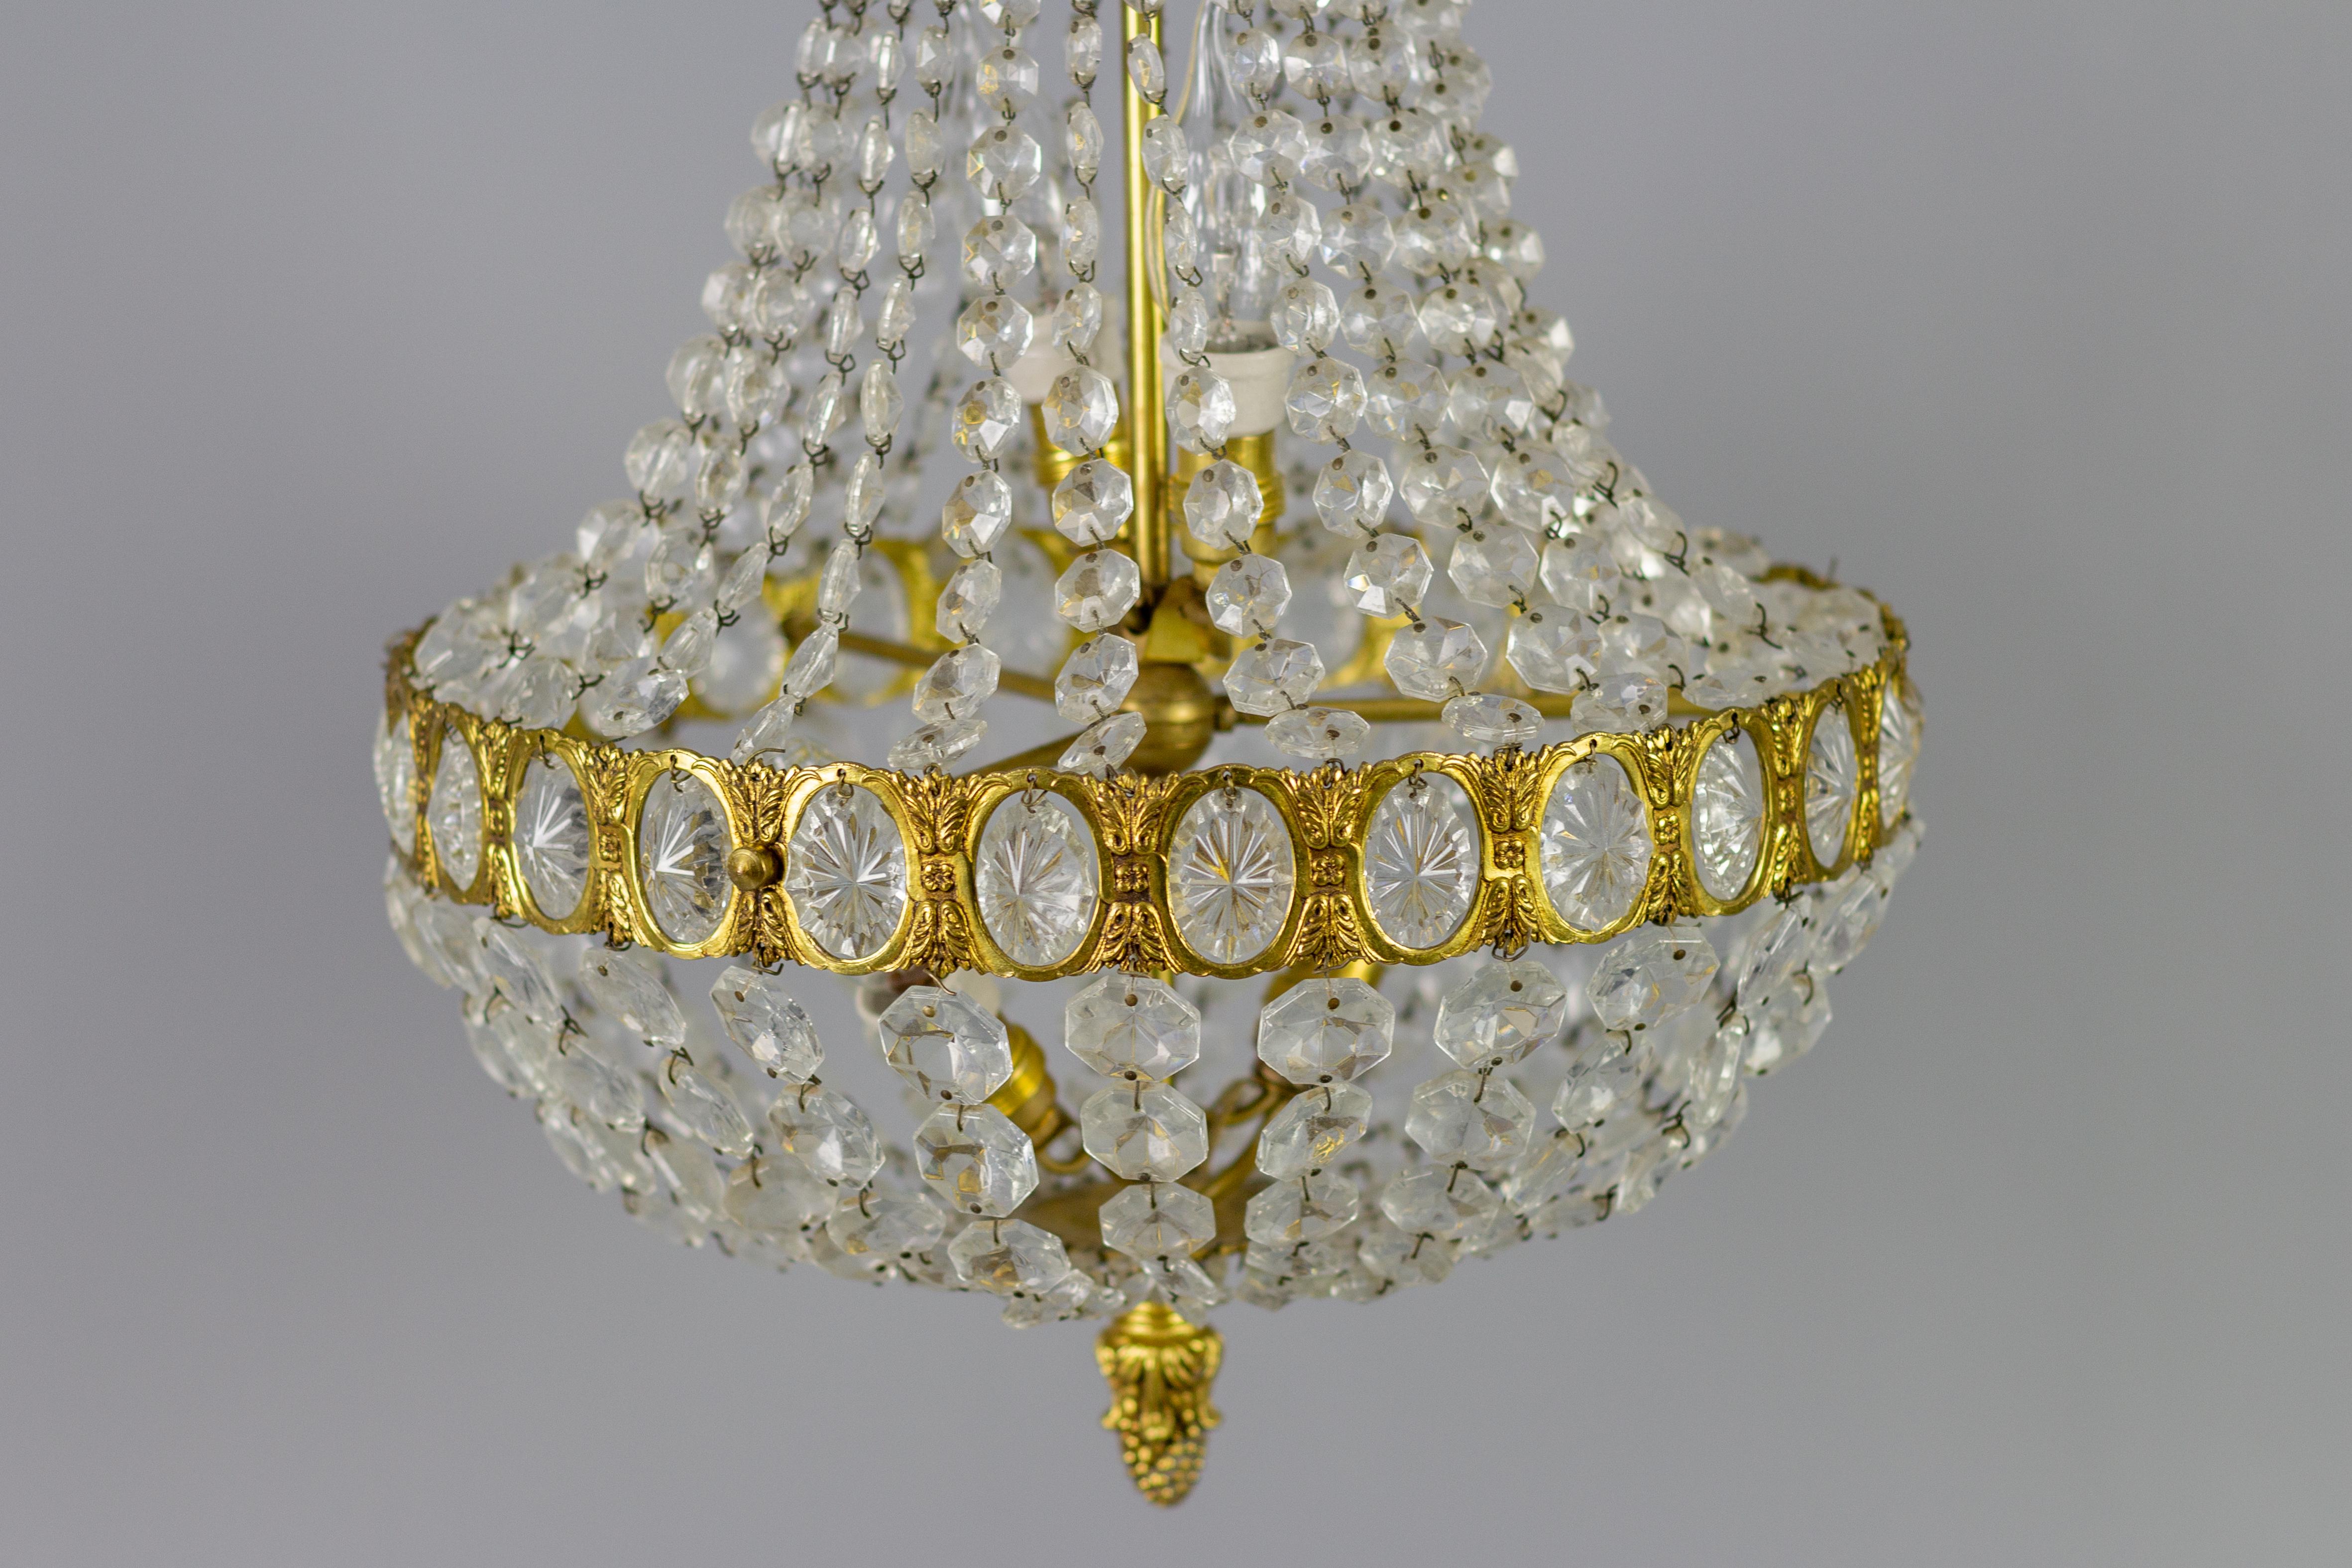 French Empire Style Crystal Glass and Four-Light Basket-Shaped Chandelier For Sale 5